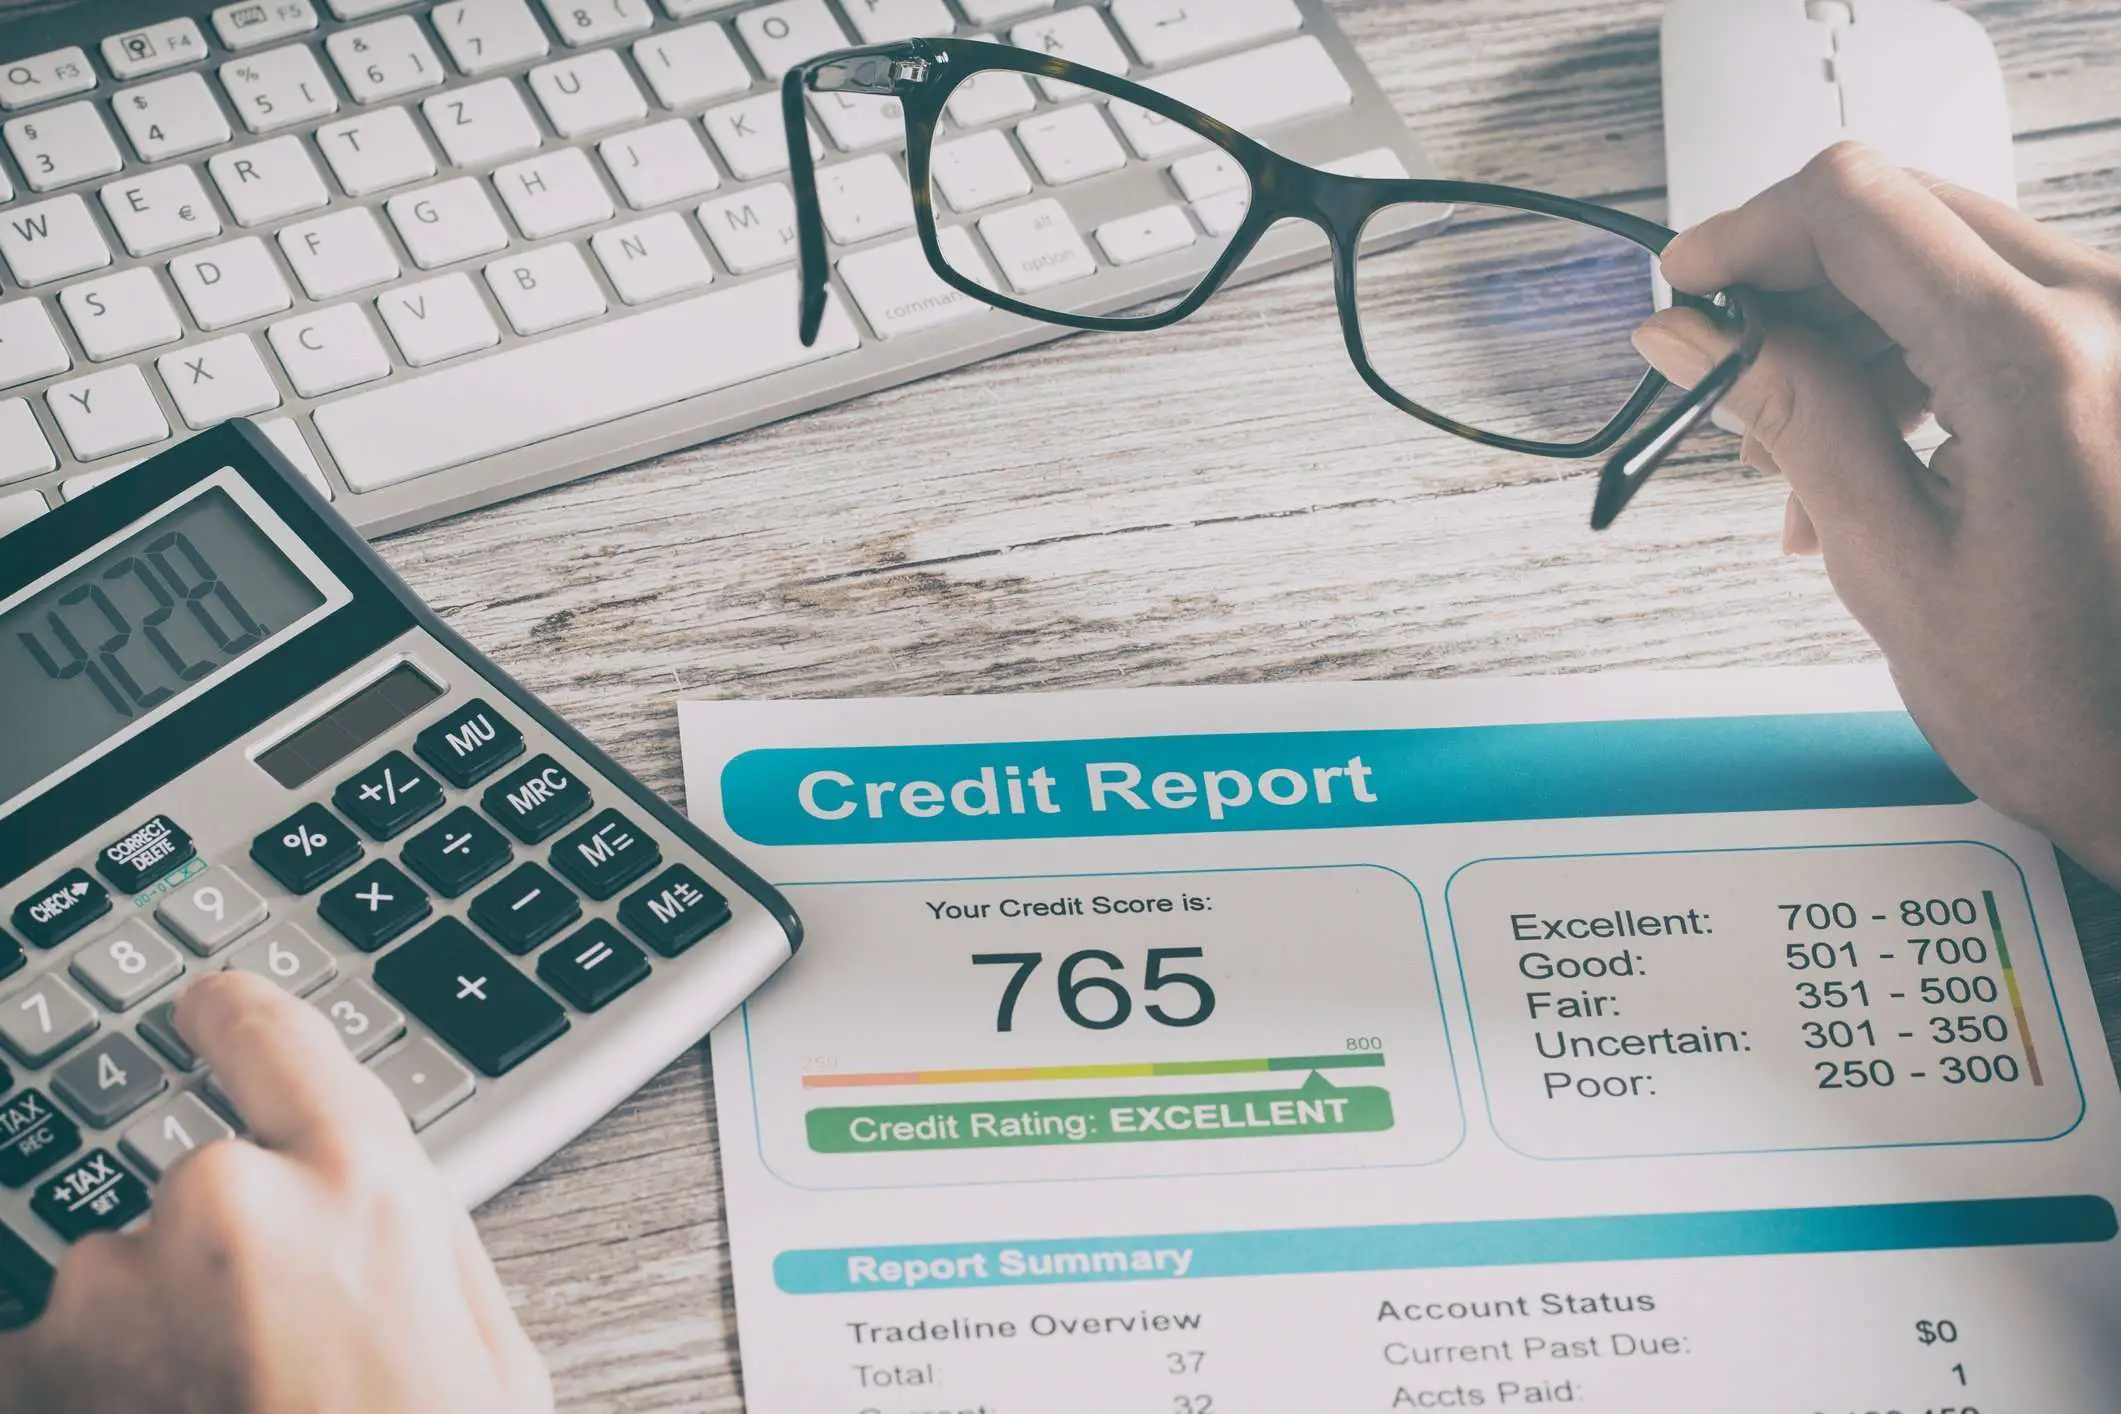 What Credit Score Do I Need to Get a Personal Loan?